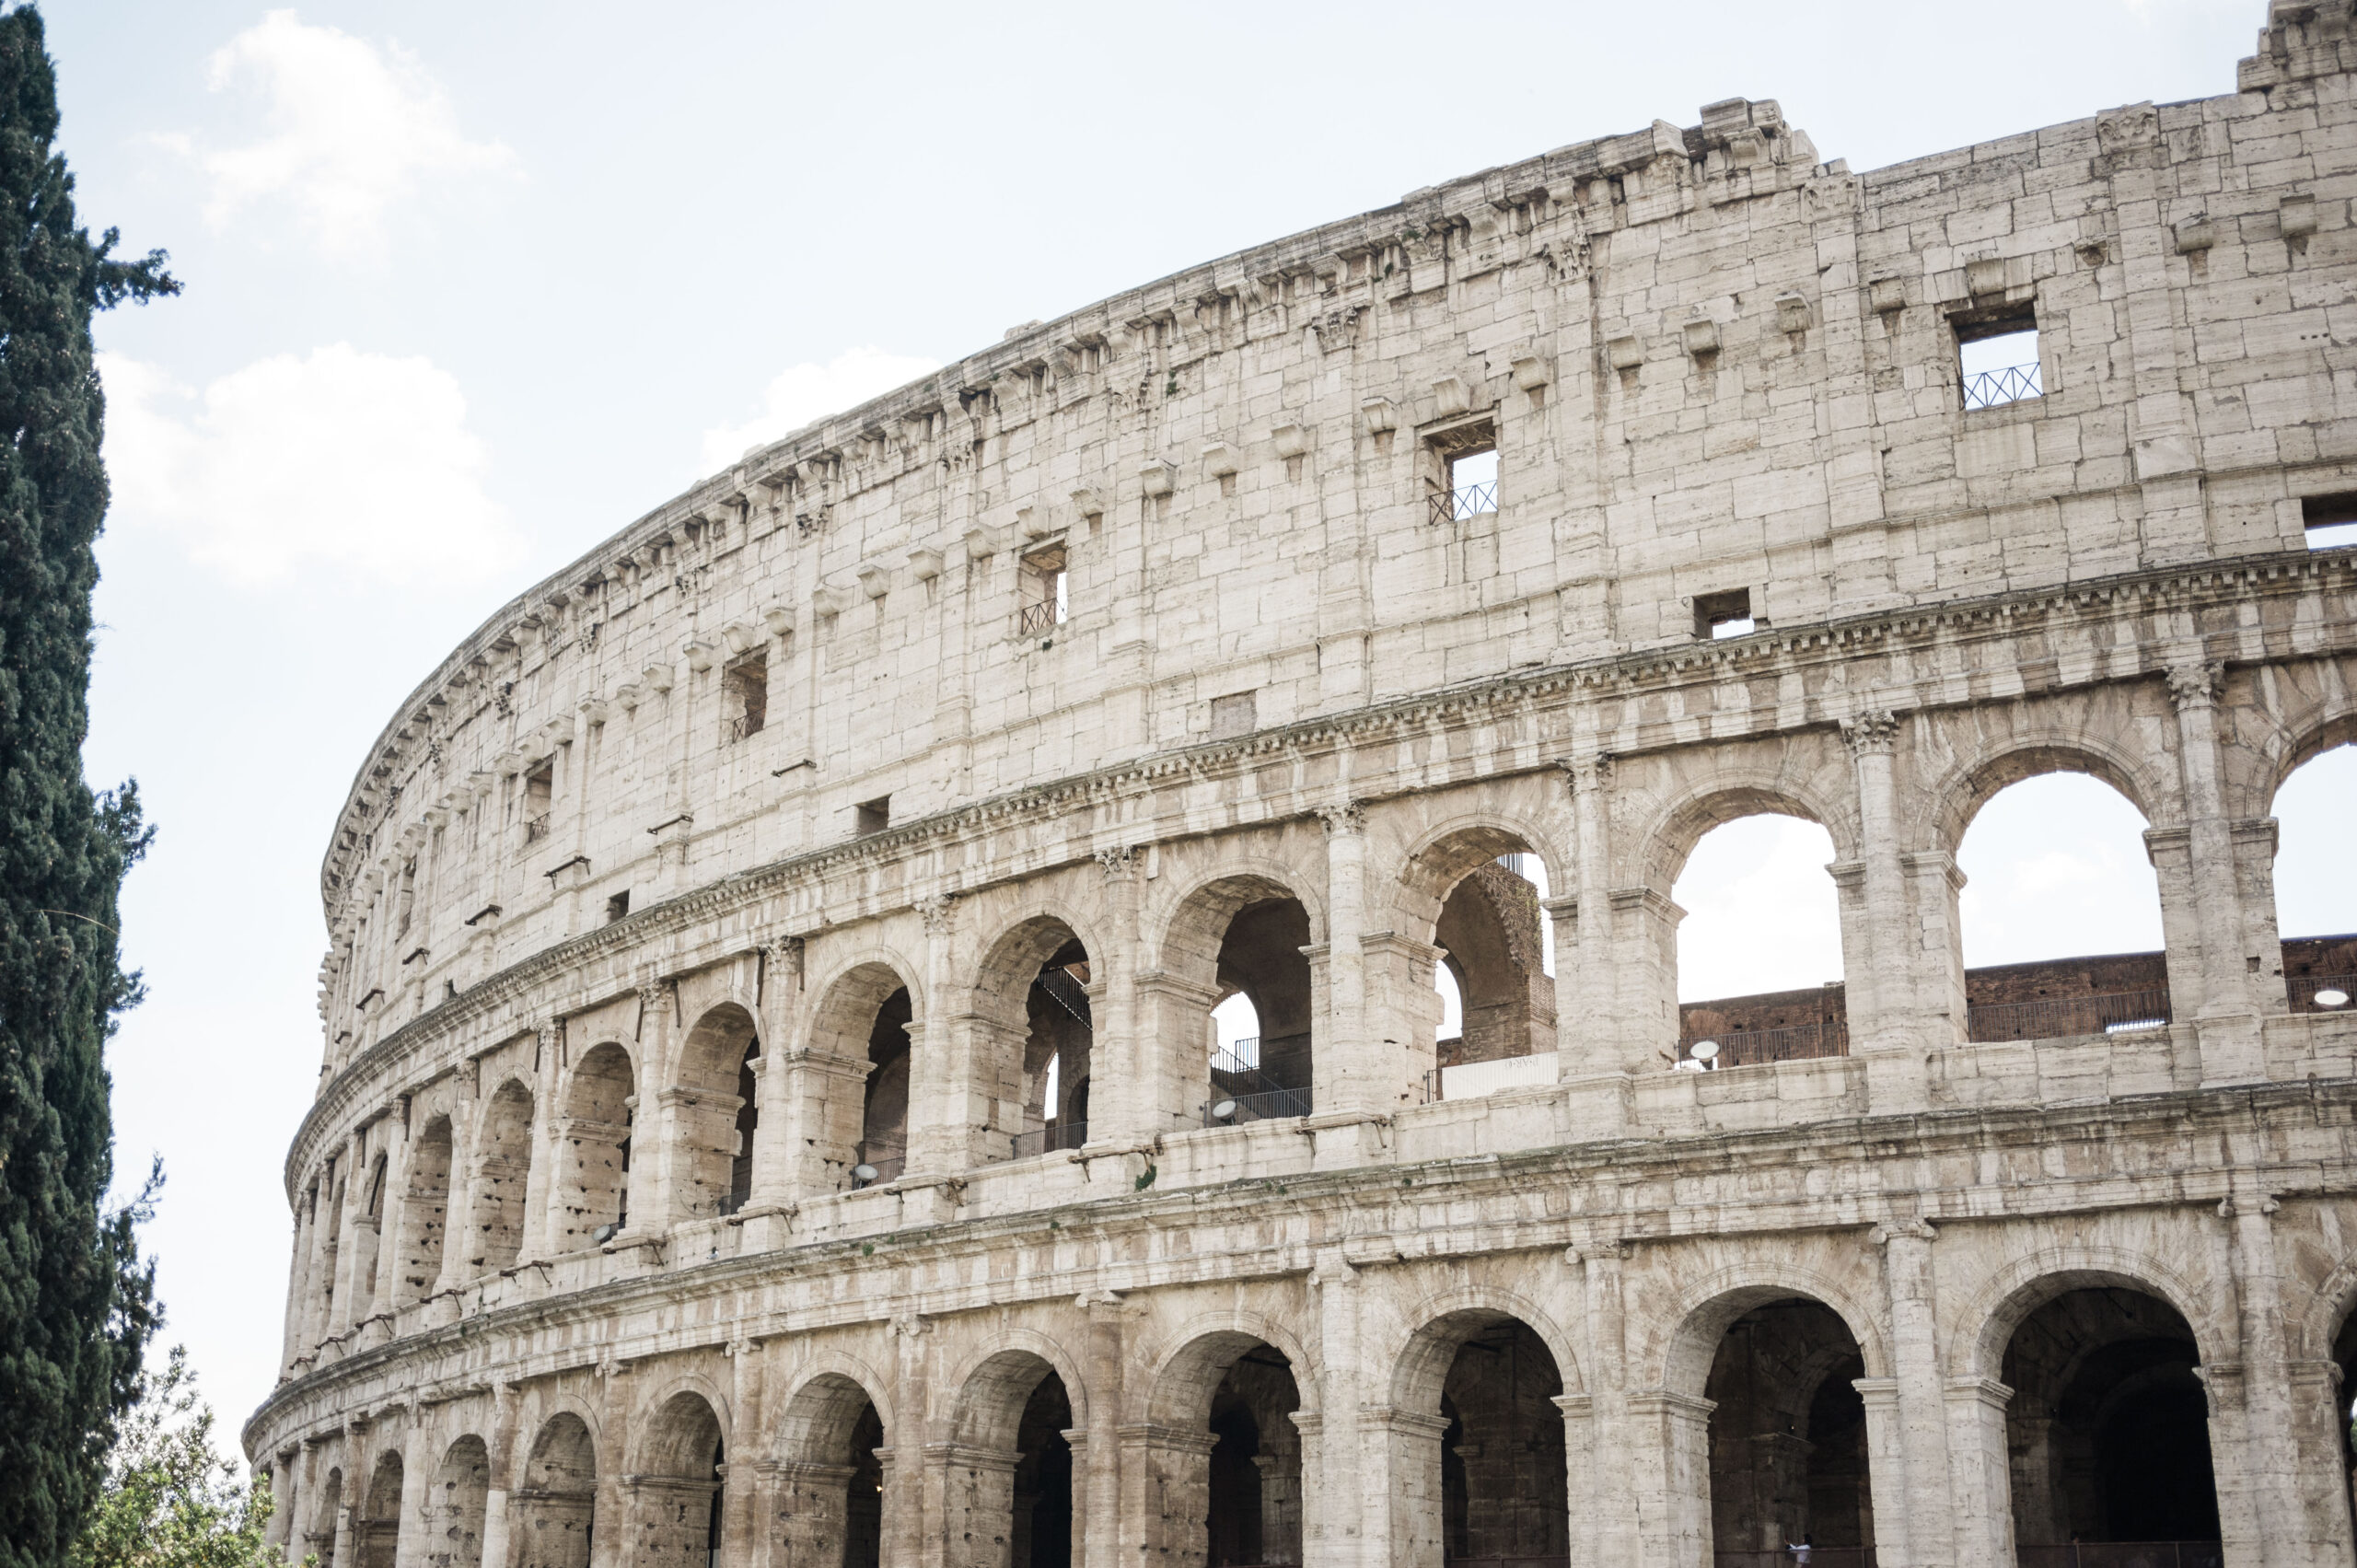 Colosseum in Rome, Italy. One of the Seven Wonders of the World. 36 hours in Rome.